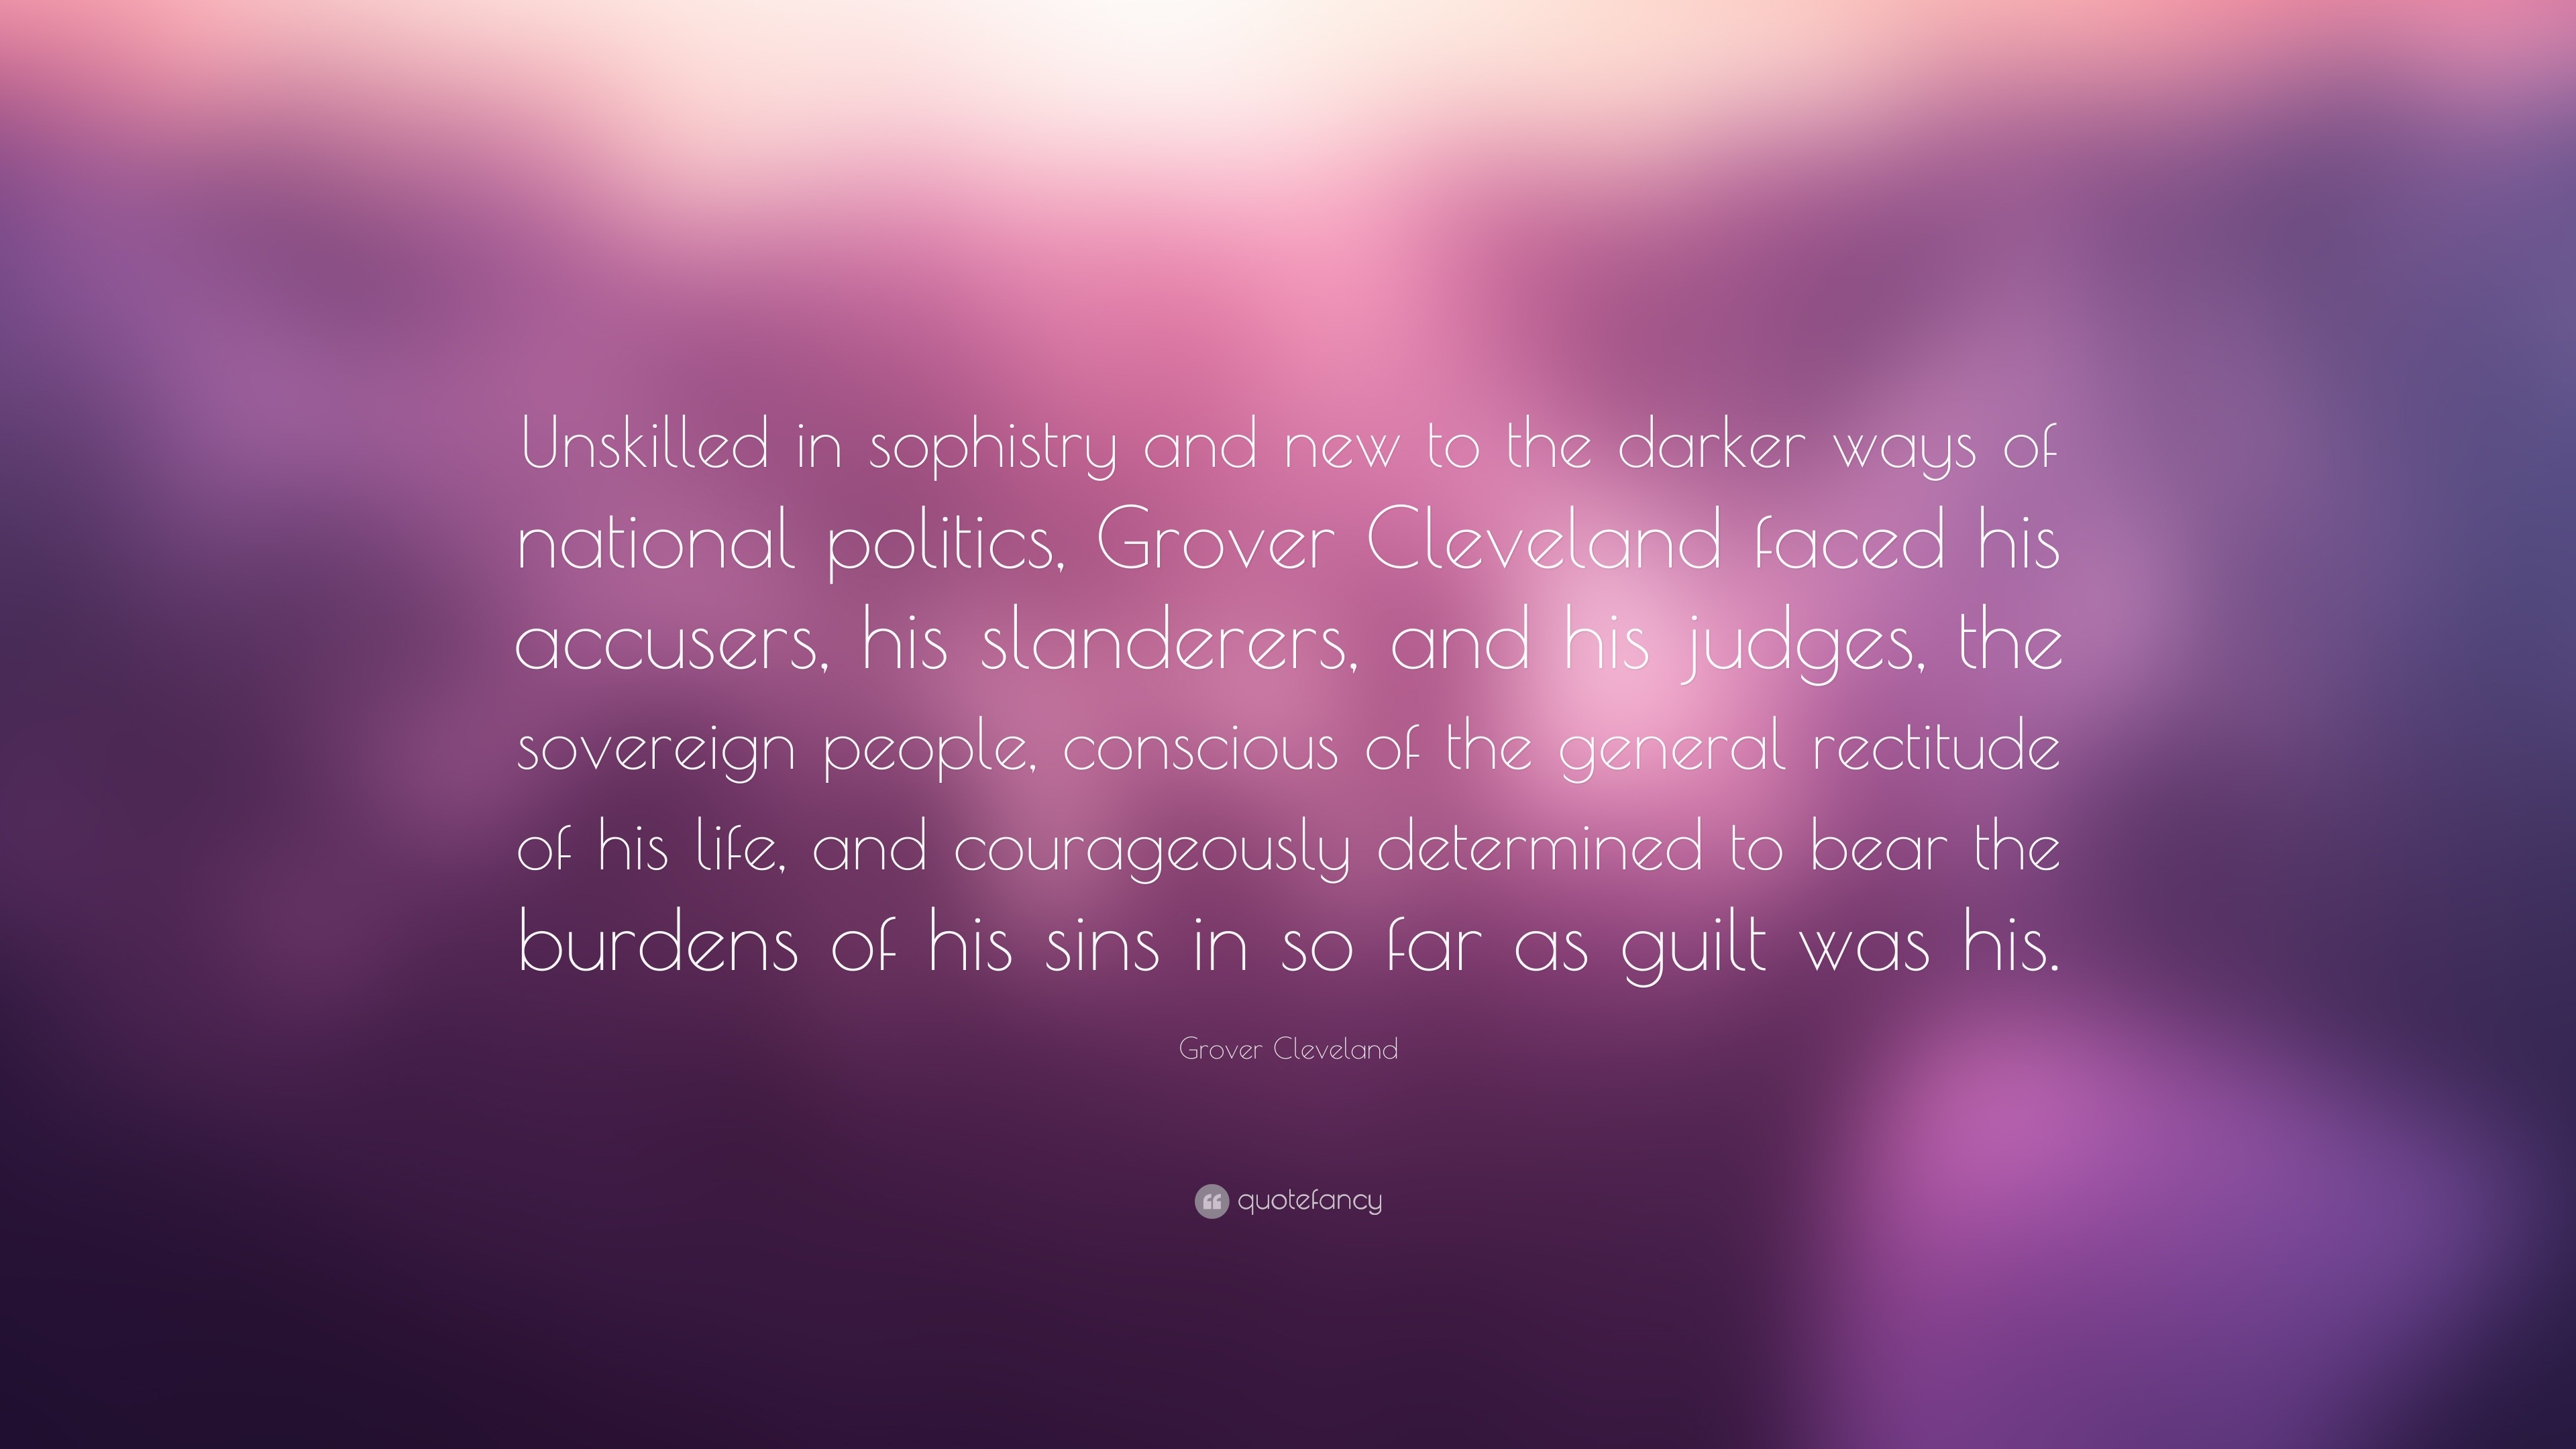 Grover Cleveland Quotes (71 wallpapers) - Quotefancy